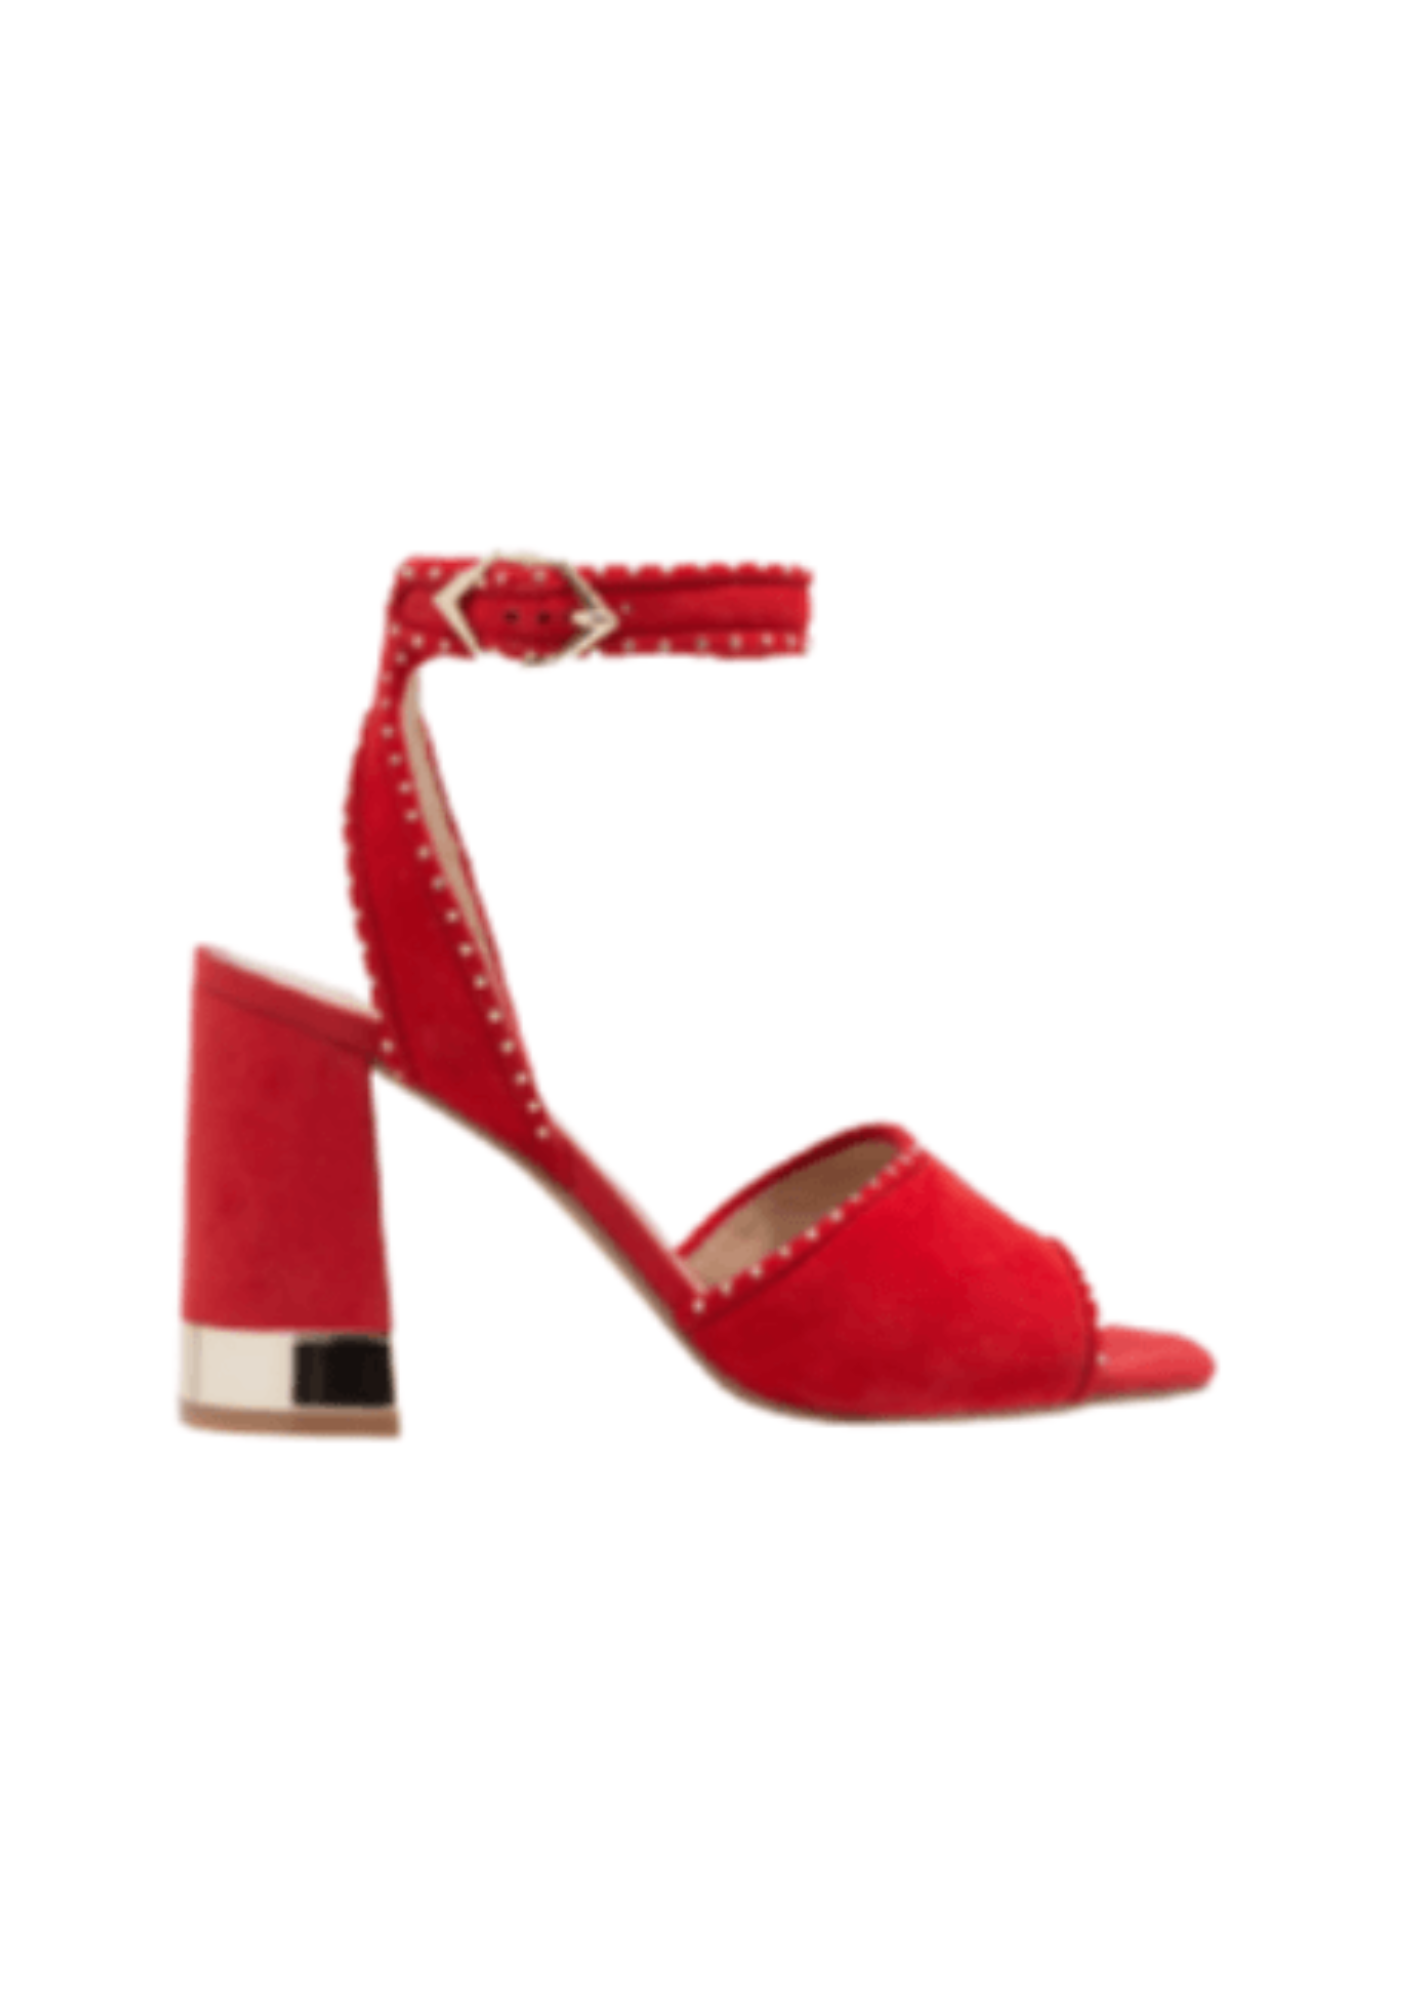 RED HIGH-HEELED SANDALS WITH RIVET DECOR